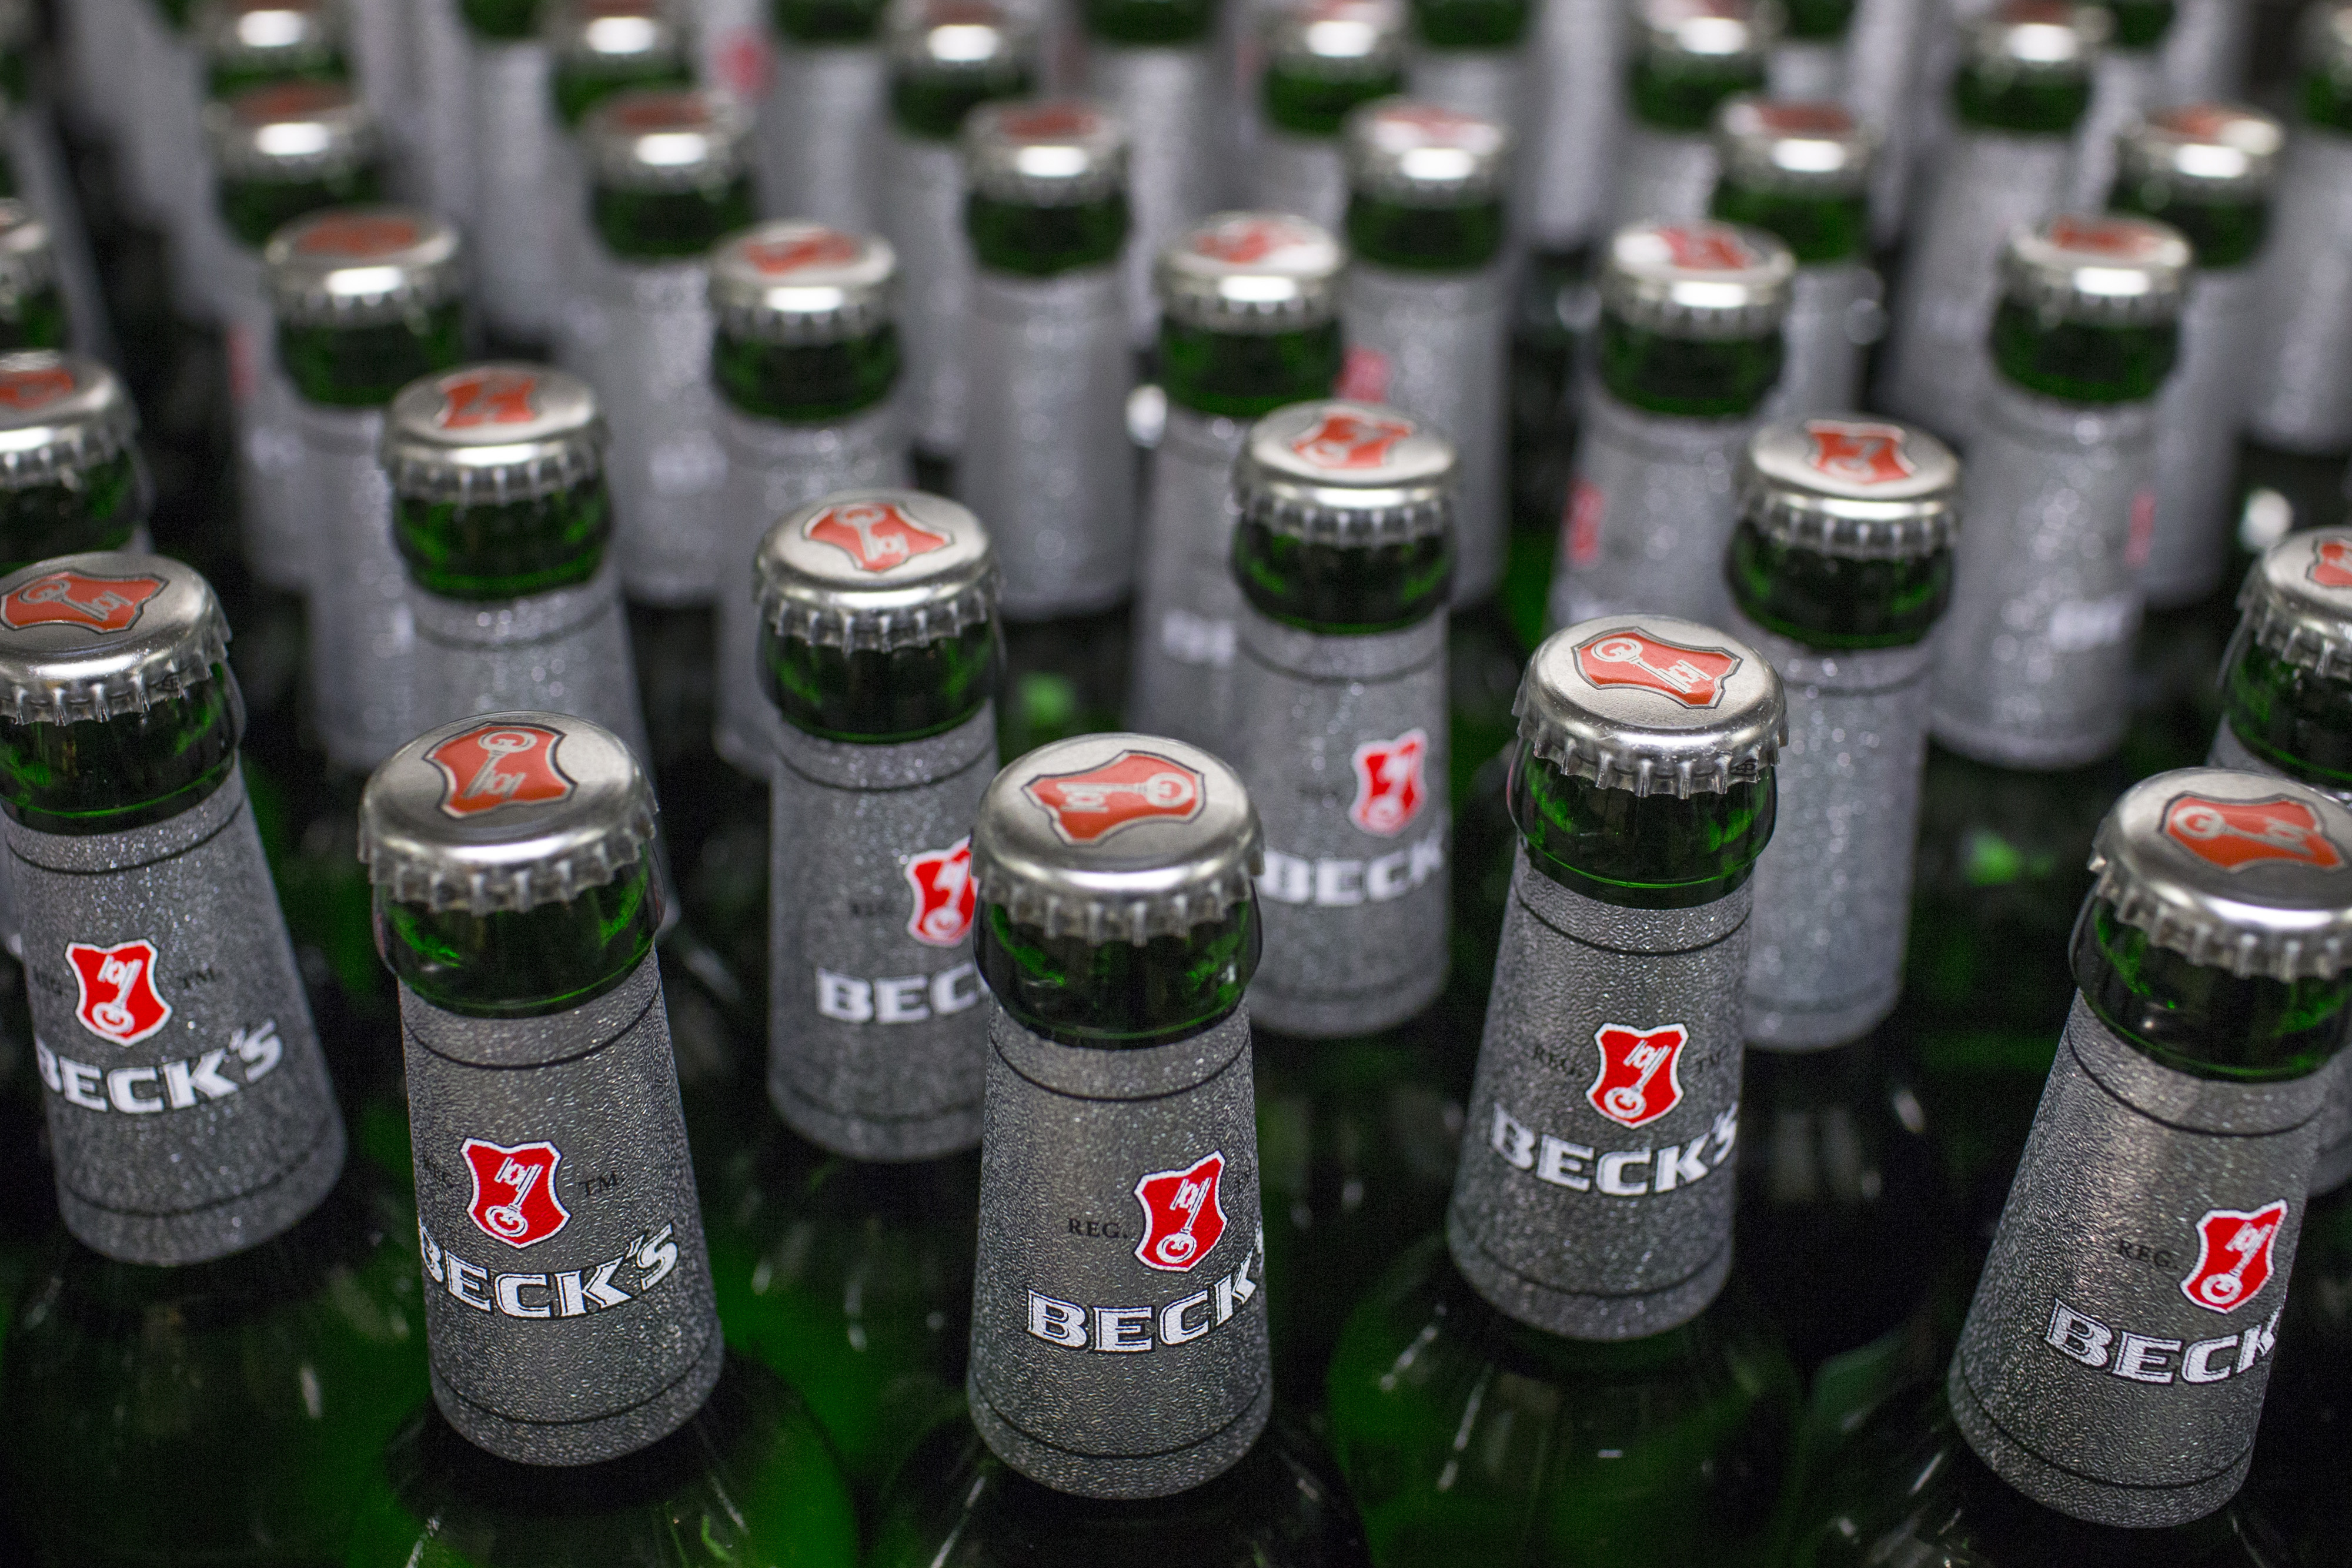 Bottles of Beck's lager beer move along the production line at the Beck's brewery, operated by Anheuser-Busch InBev NV, in Bremen, Germany on Nov. 4, 2015. (Jasper Juinen—Bloomberg/Getty Images)